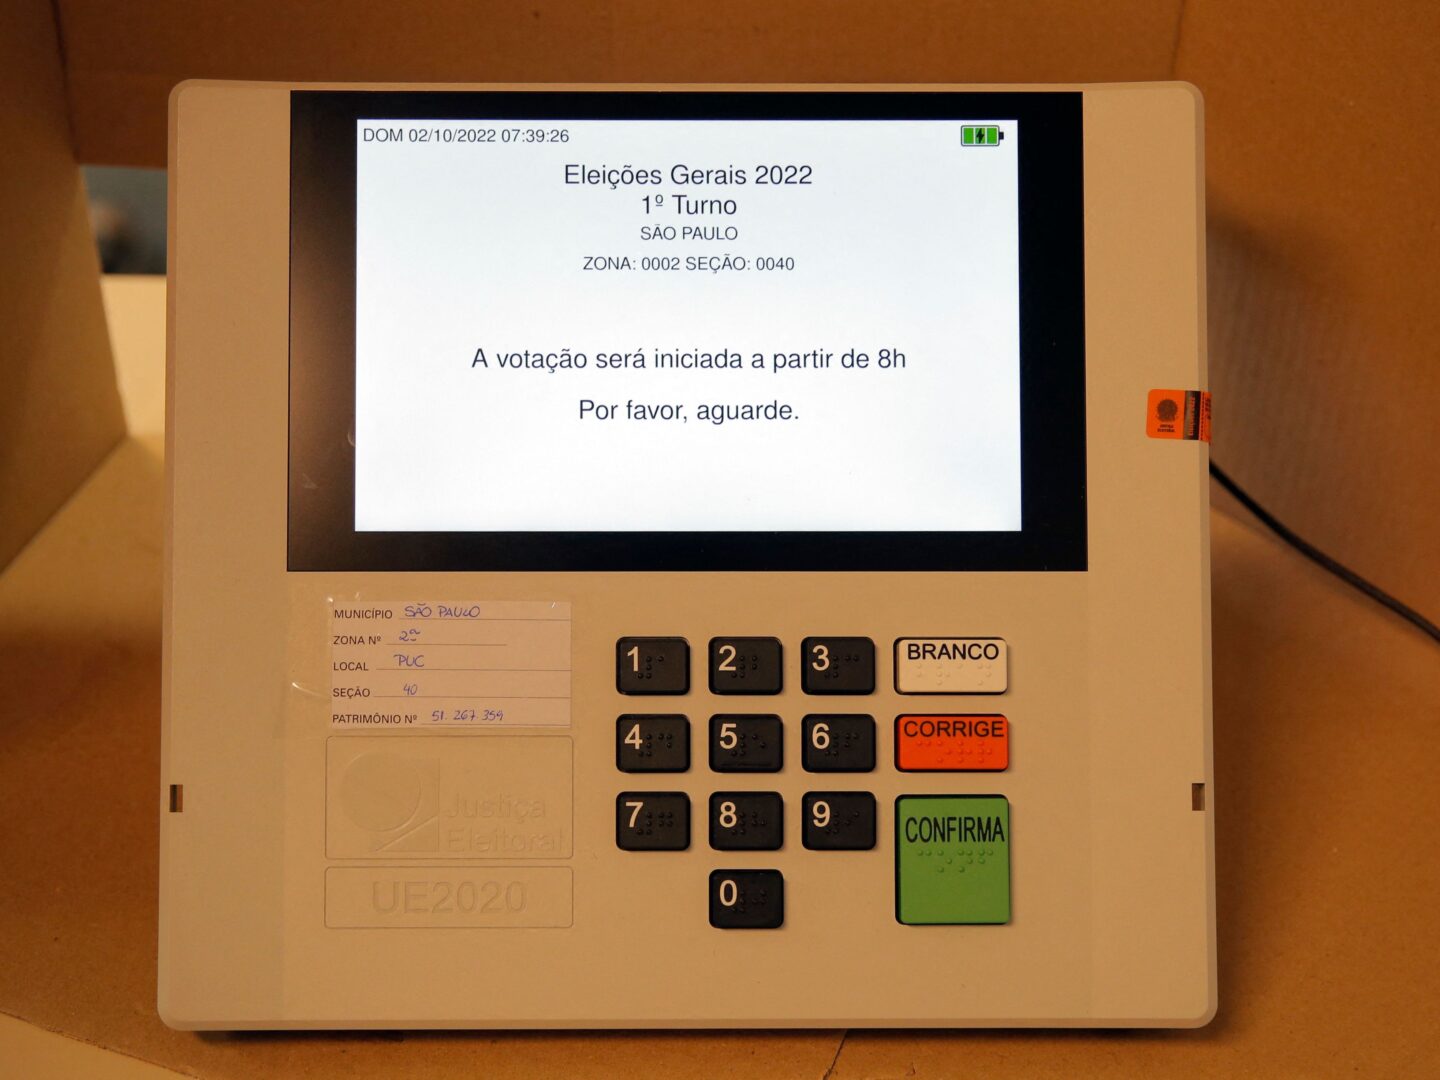 Picture of an electronic voting machine taken as Electoral Justice employees prepare a polling station during the legislative and presidential election, in Sao Paulo, Brazil, on October 2, 2022. - Voting began early Sunday in South America's biggest economy, plagued by gaping inequalities and violence, where voters ar expected to choose between far-right incumbent Jair Bolsonaro and leftist front-runner Luiz Inacio Lula da Silva, any of which must garner 50 percent of valid votes, plus one, to win in the first round. (Photo by CAIO GUATELLI / AFP) (Photo by CAIO GUATELLI/AFP via Getty Images)